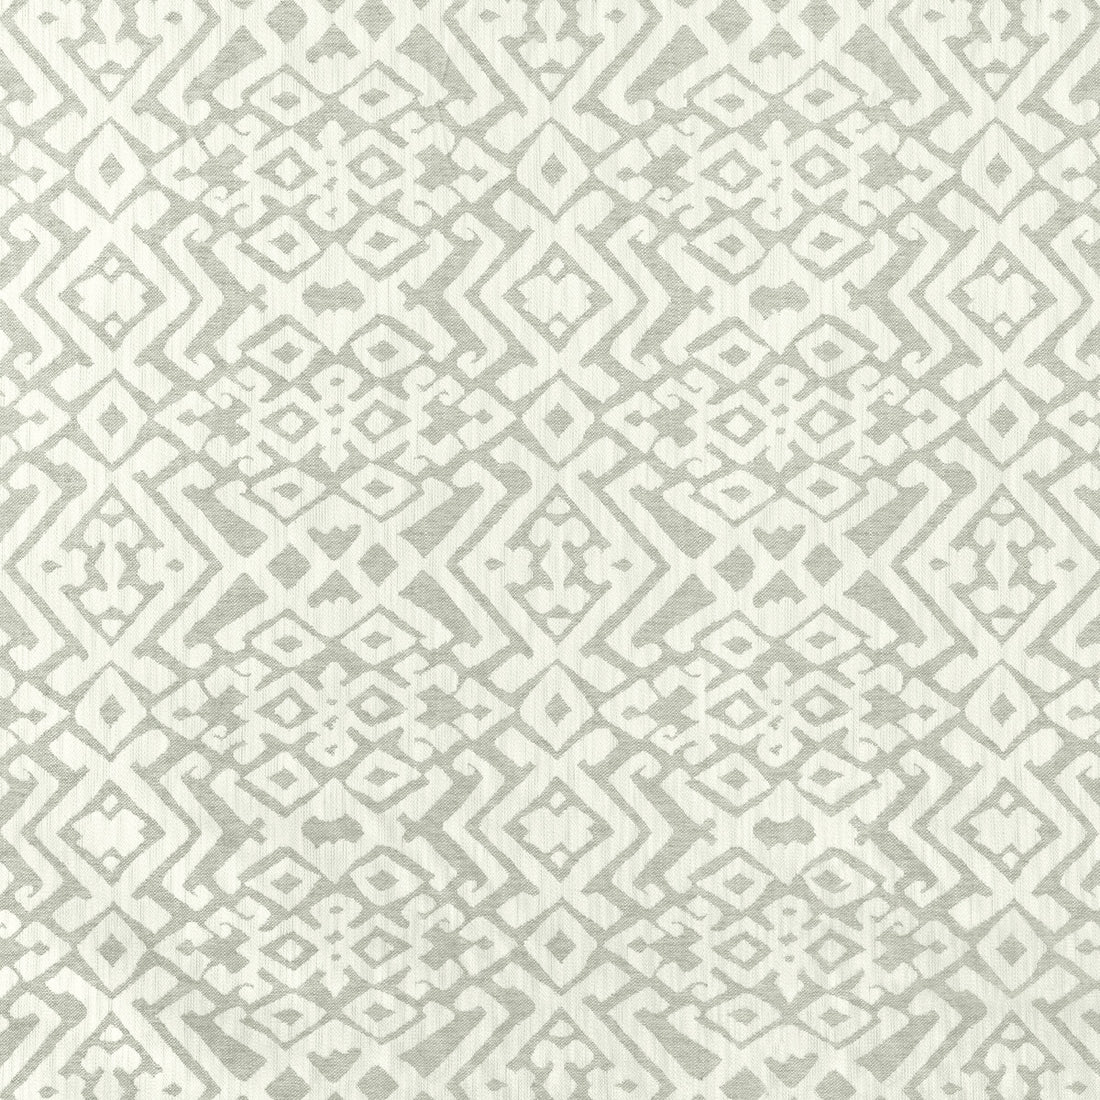 Springbok fabric in pewter color - pattern 36874.11.0 - by Kravet Couture in the Atelier Weaves collection